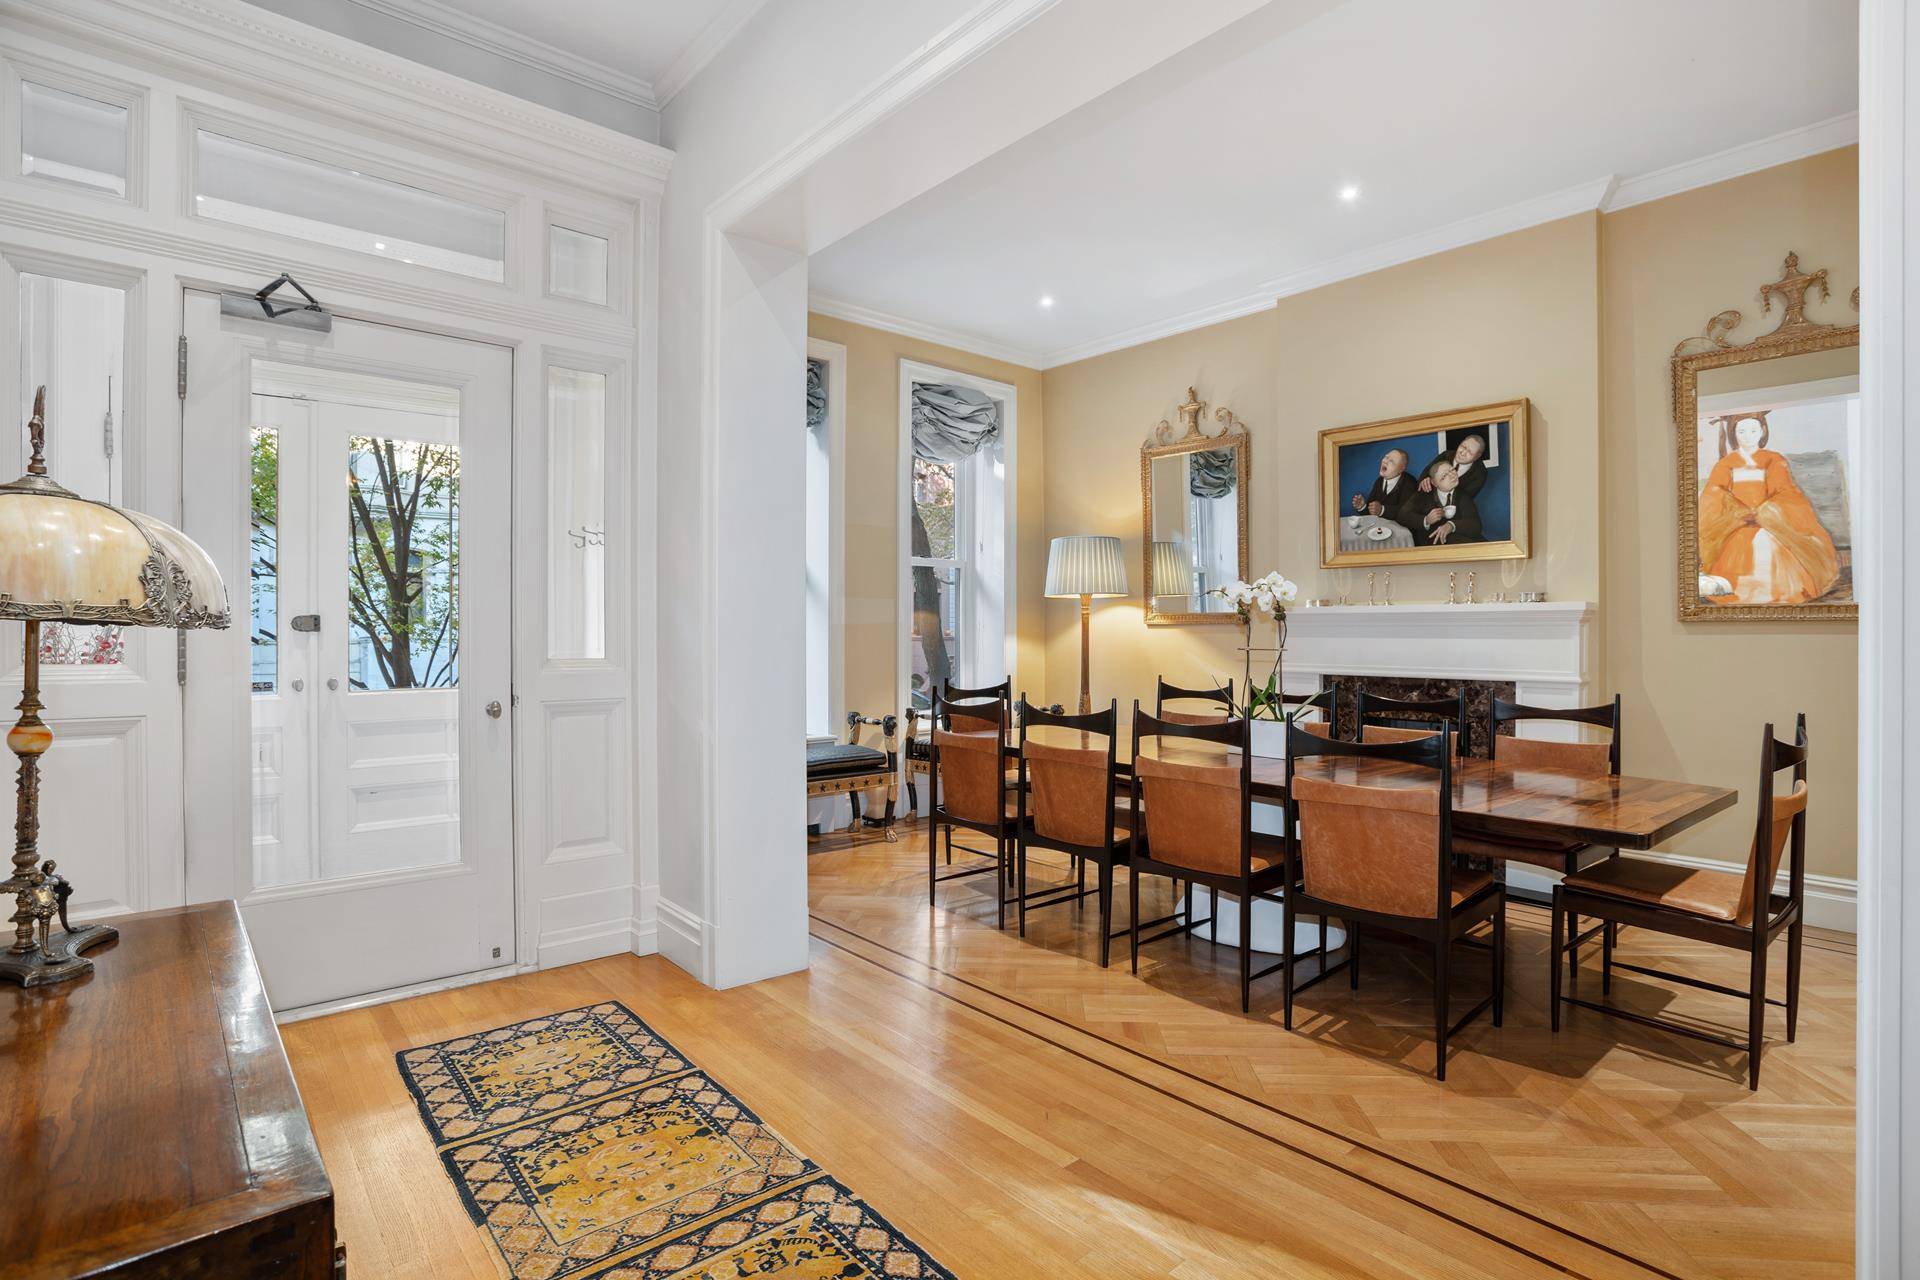 Situated on a coveted park block between Central Park West and Columbus Avenue, 48 West 88th Street is a 20' wide, 5 story, bright and immaculately maintained townhouse spanning approximately ...